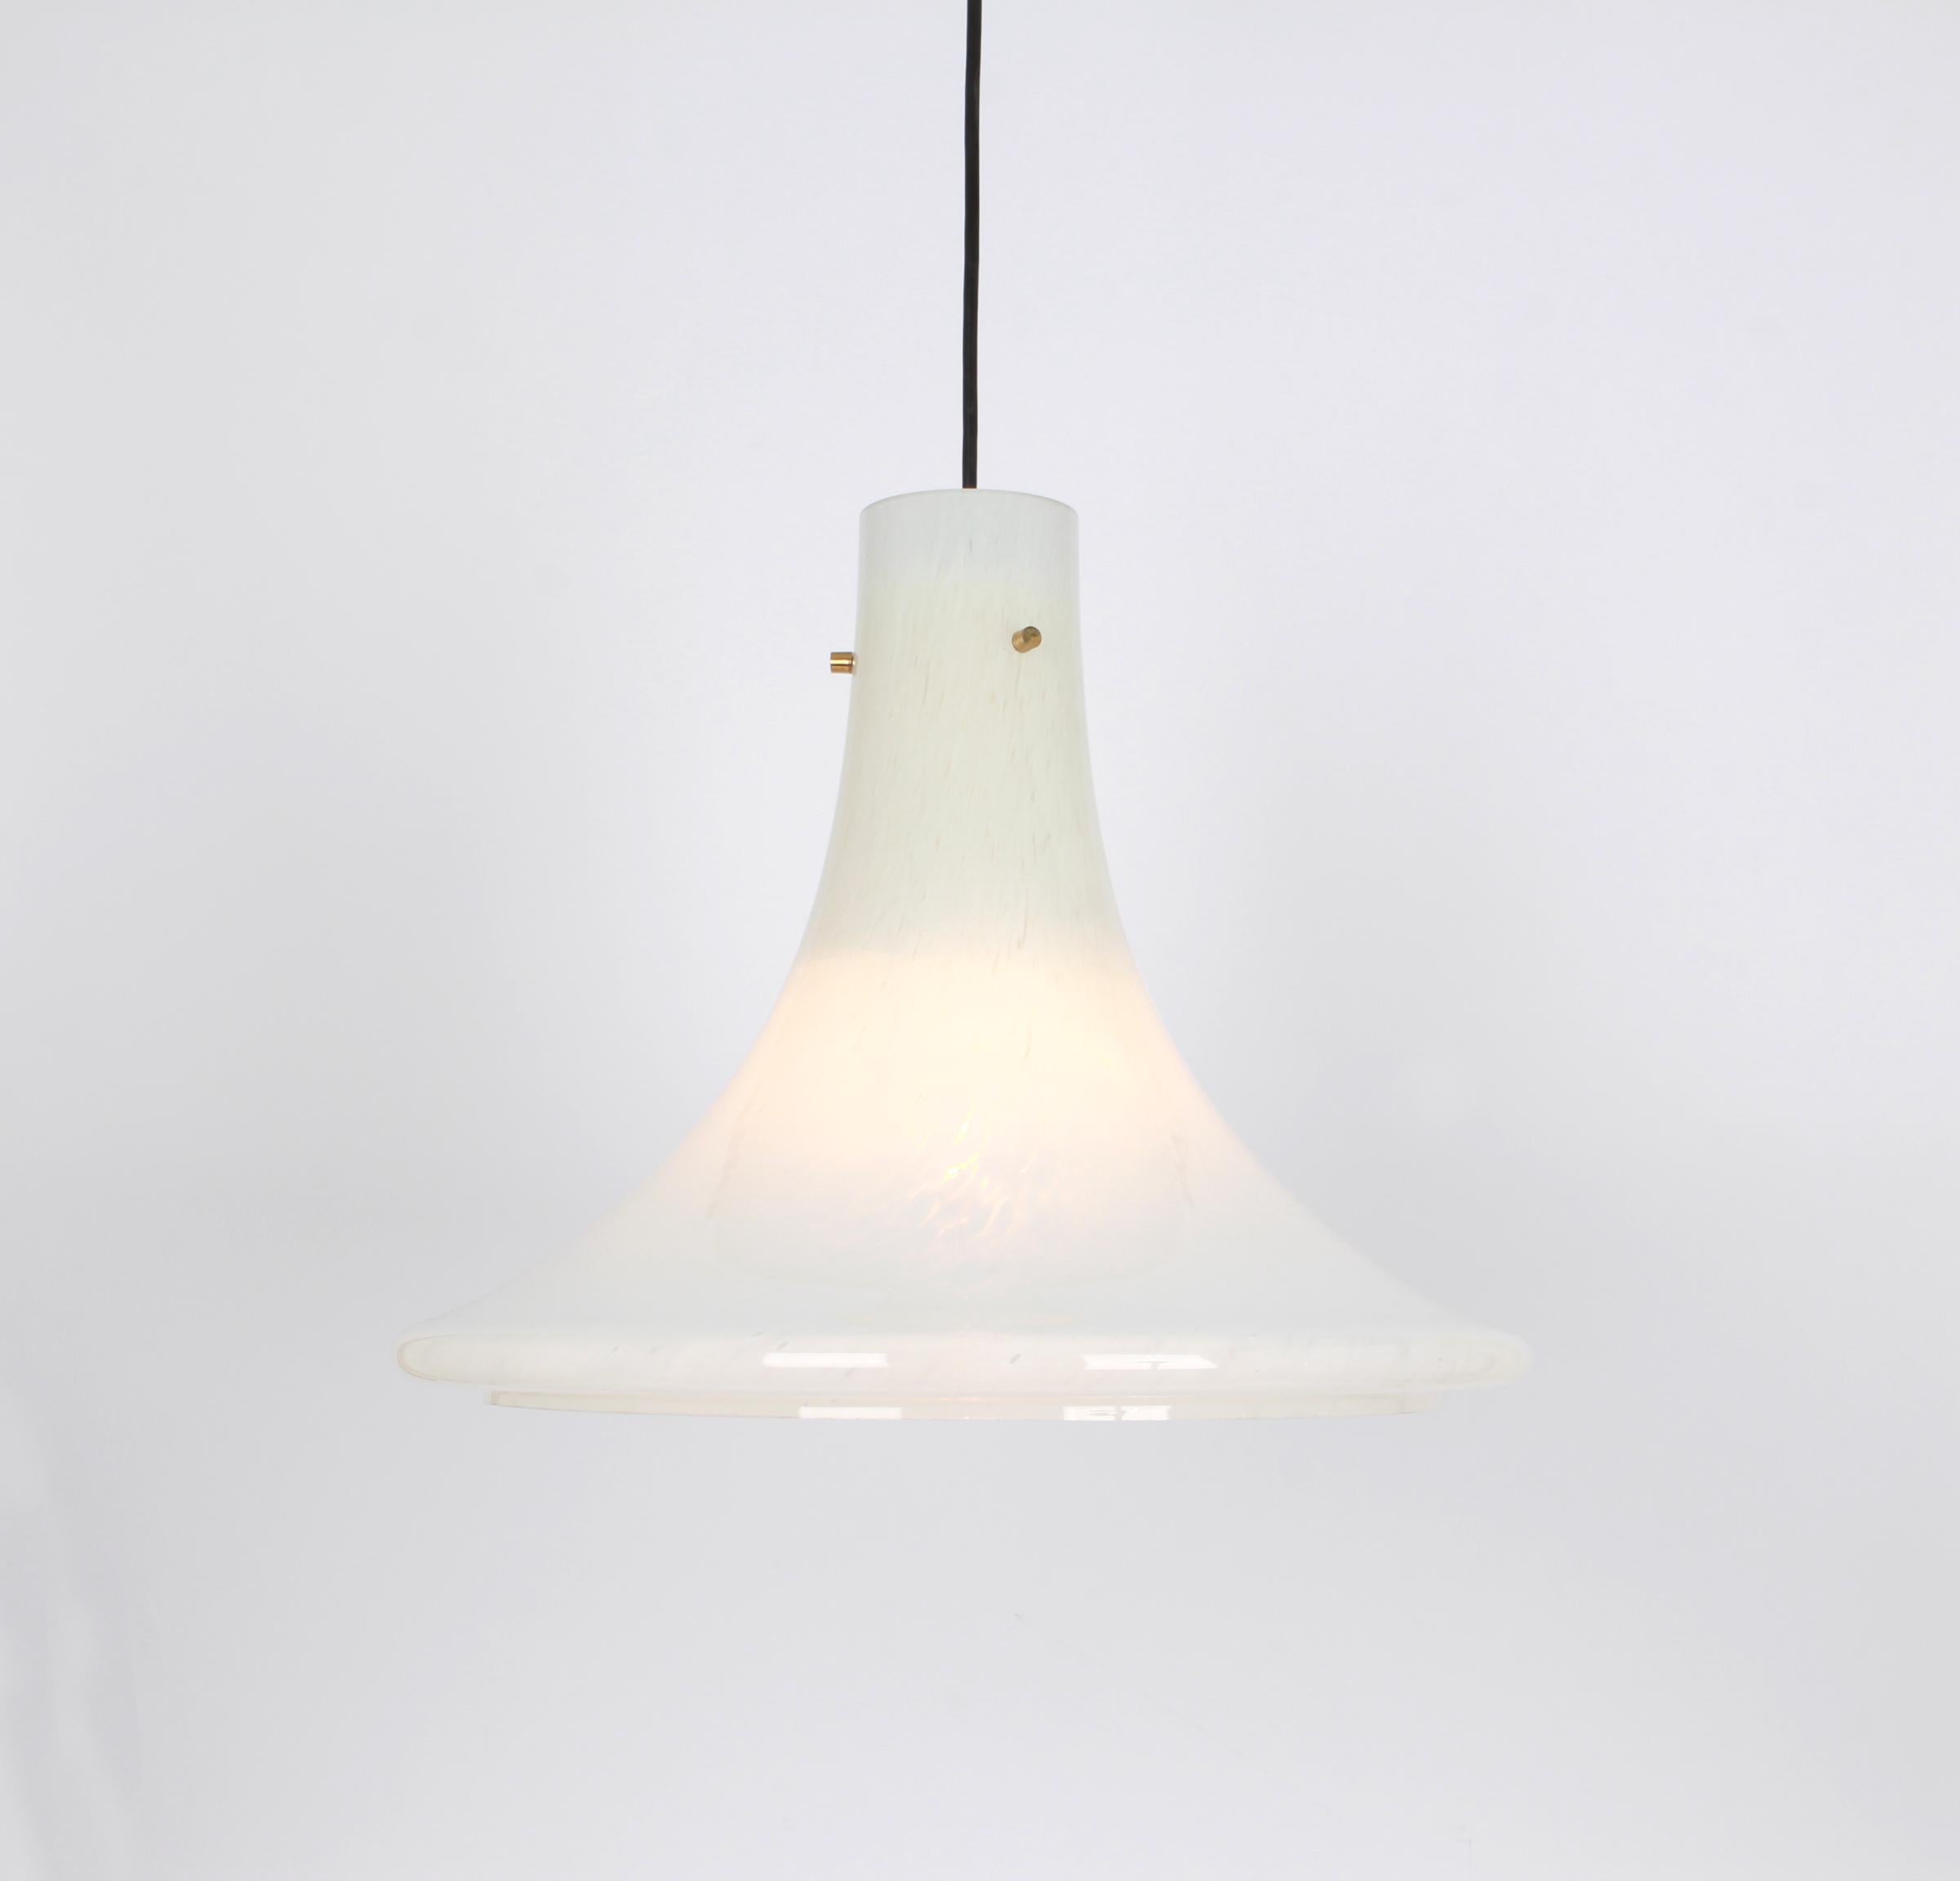 Stunning opaline glass pendant in a pyramidic form made by Limburg, Germany, 1970s
High quality and in very good condition. Cleaned, well-wired and ready to use. 

The fixture requires one standard bulb.
Light bulbs are not included. It is